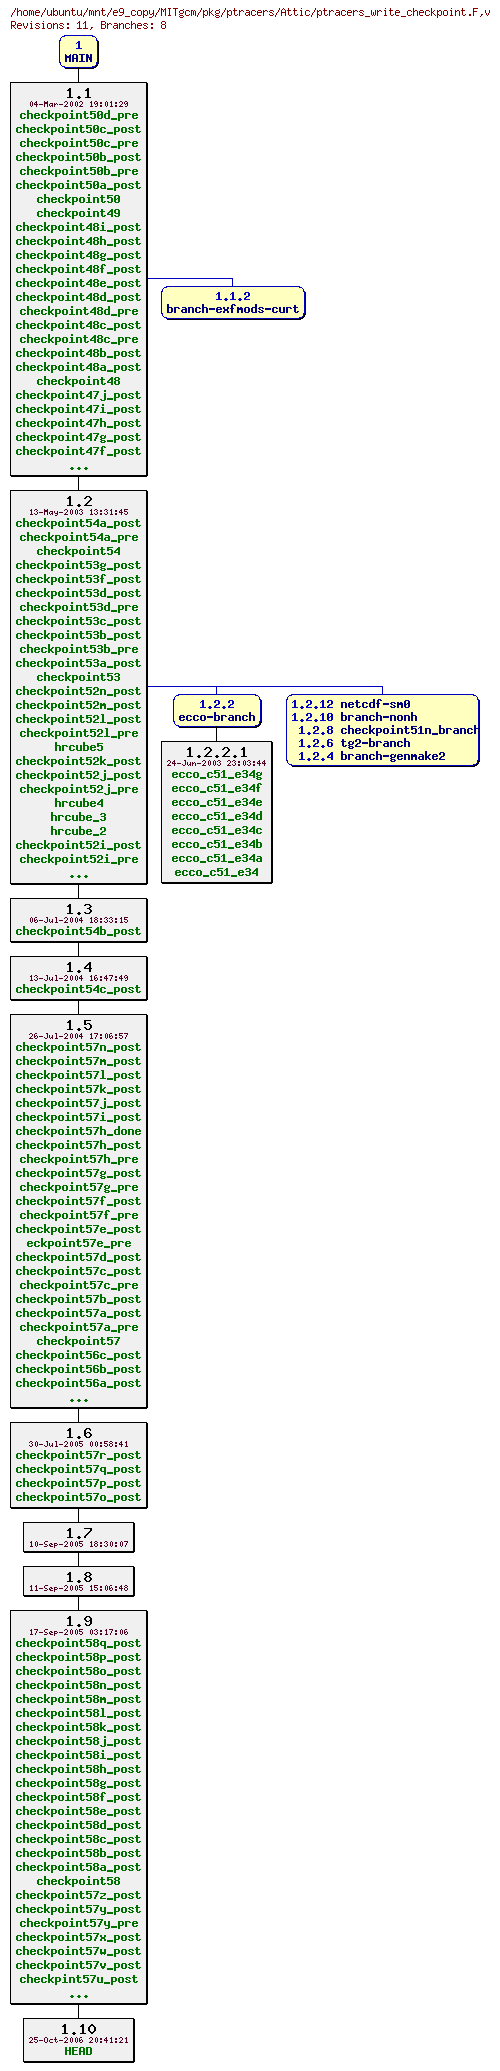 Revisions of MITgcm/pkg/ptracers/ptracers_write_checkpoint.F